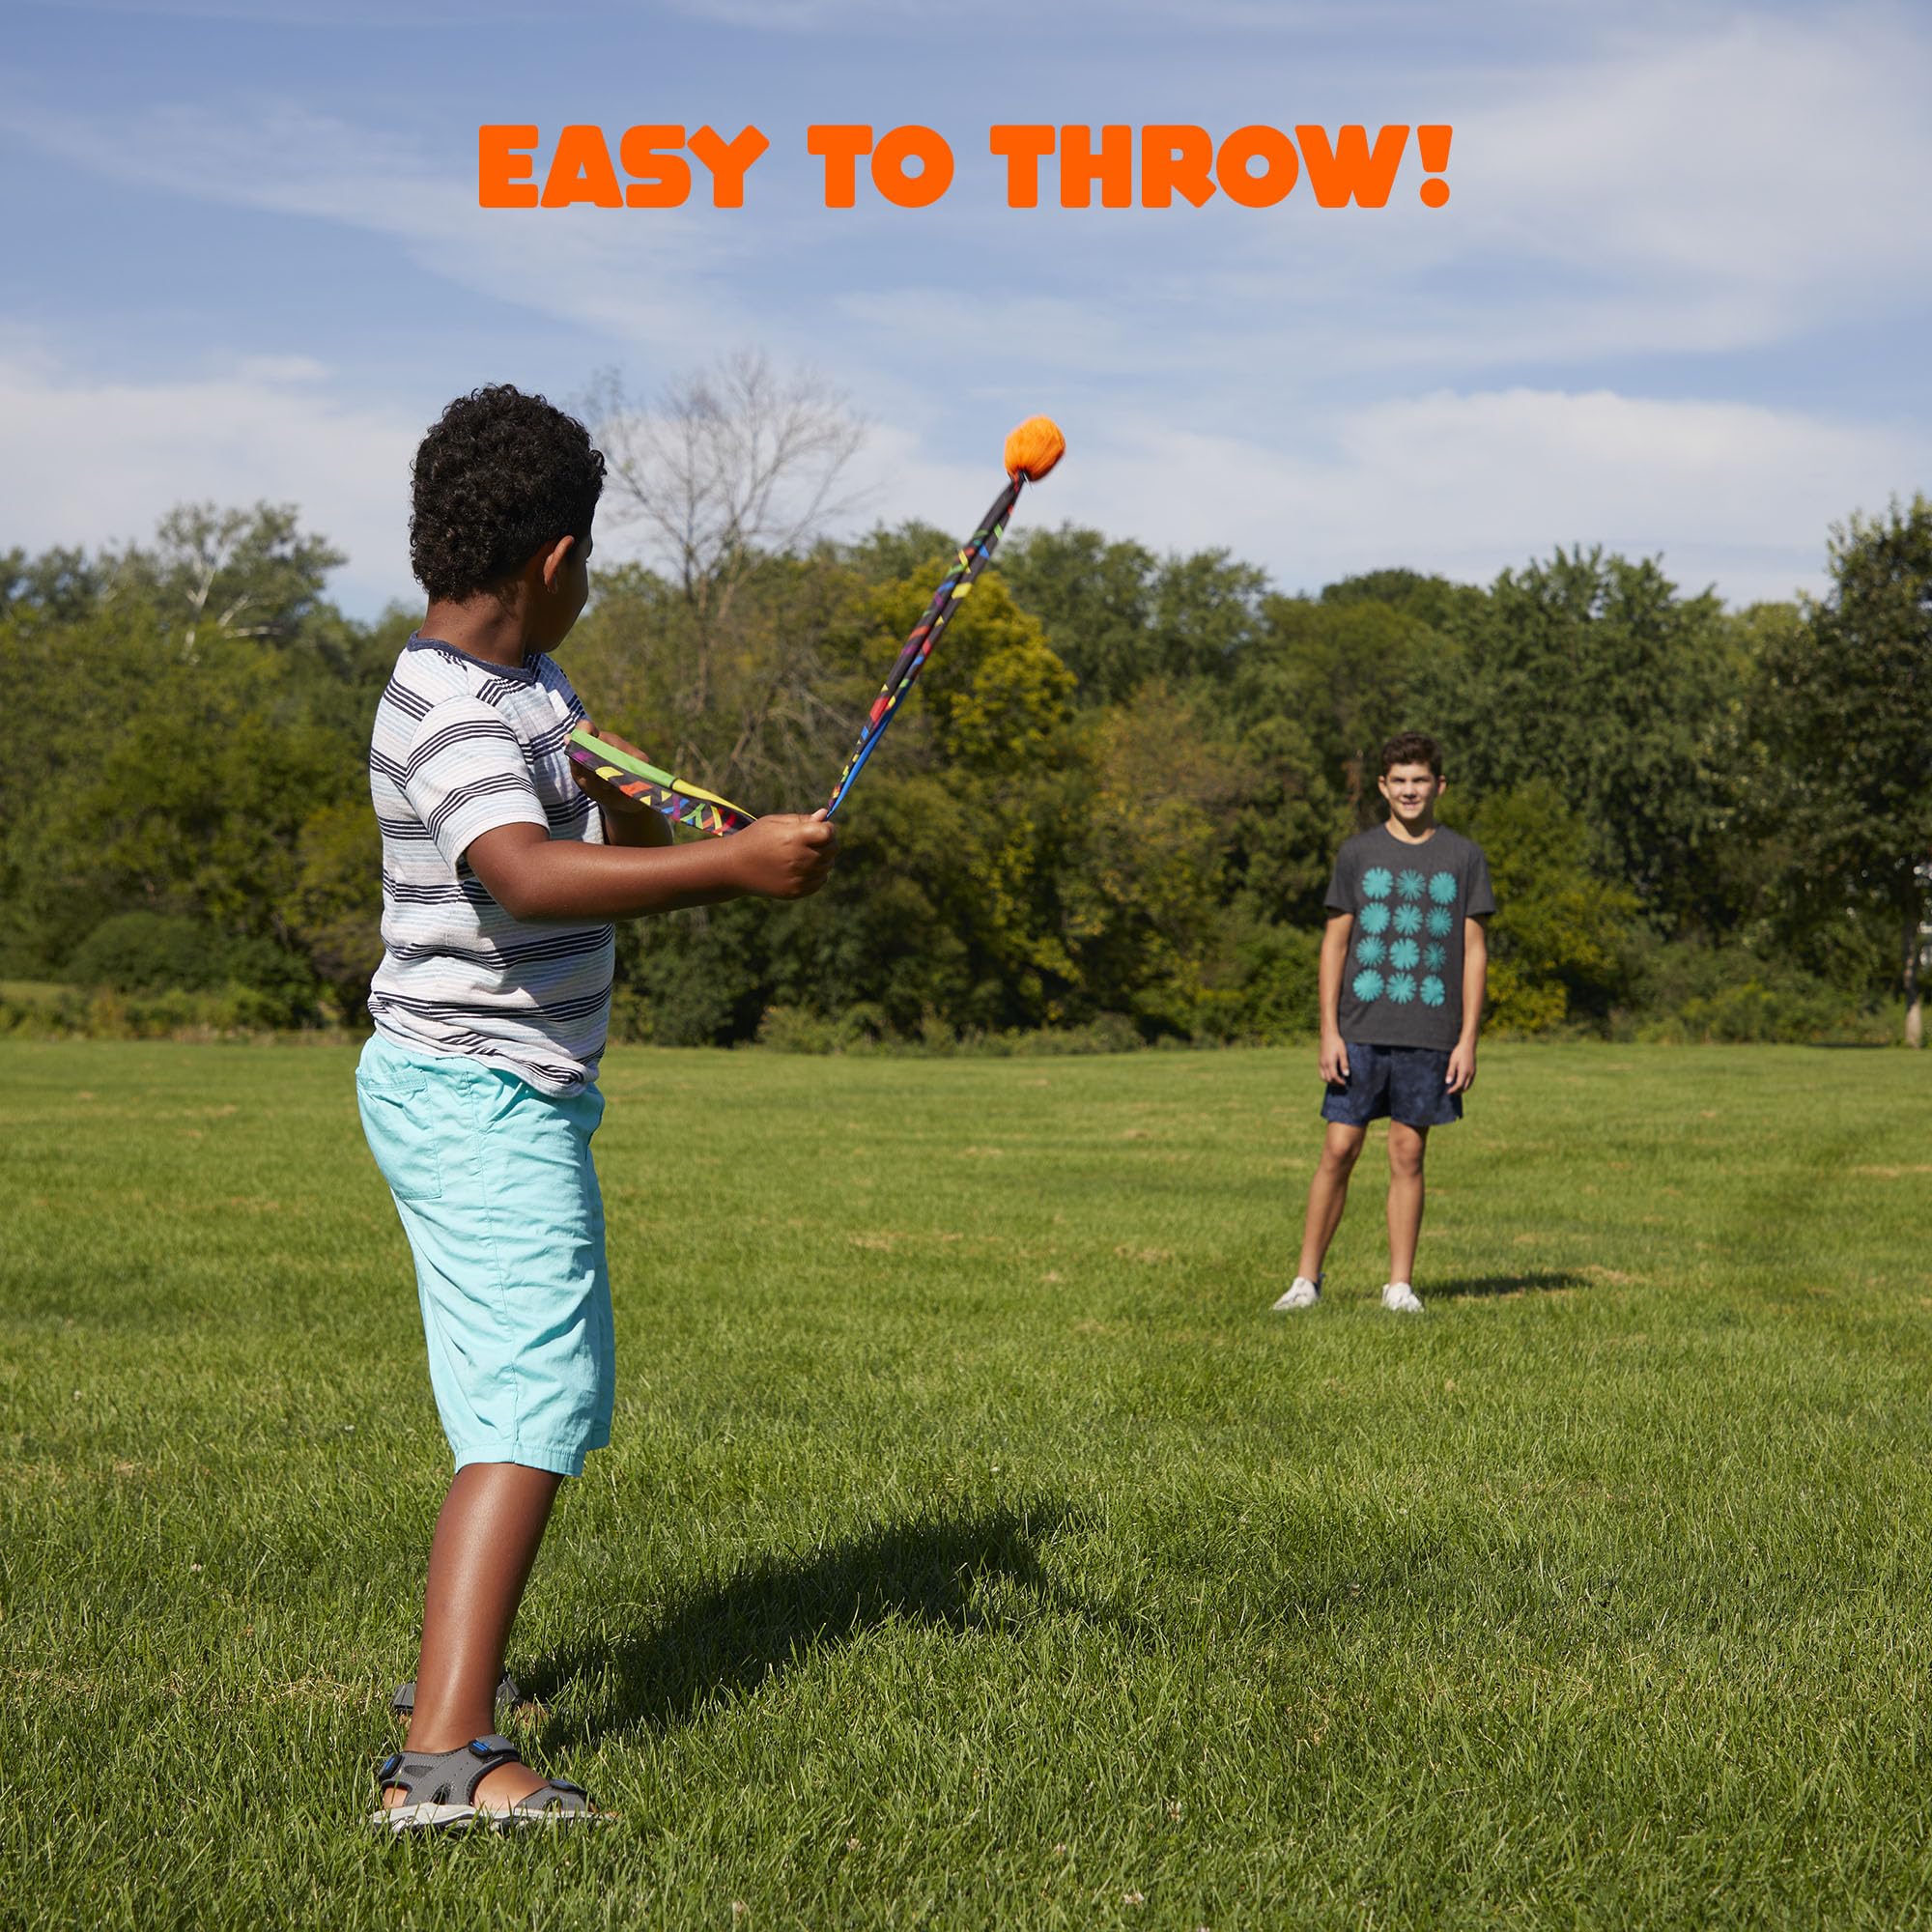 Koosh - Comet - Easy to Catch and Throw Ball - Outdoor Sports Toy - for Adults and Kids Ages 3 and Up